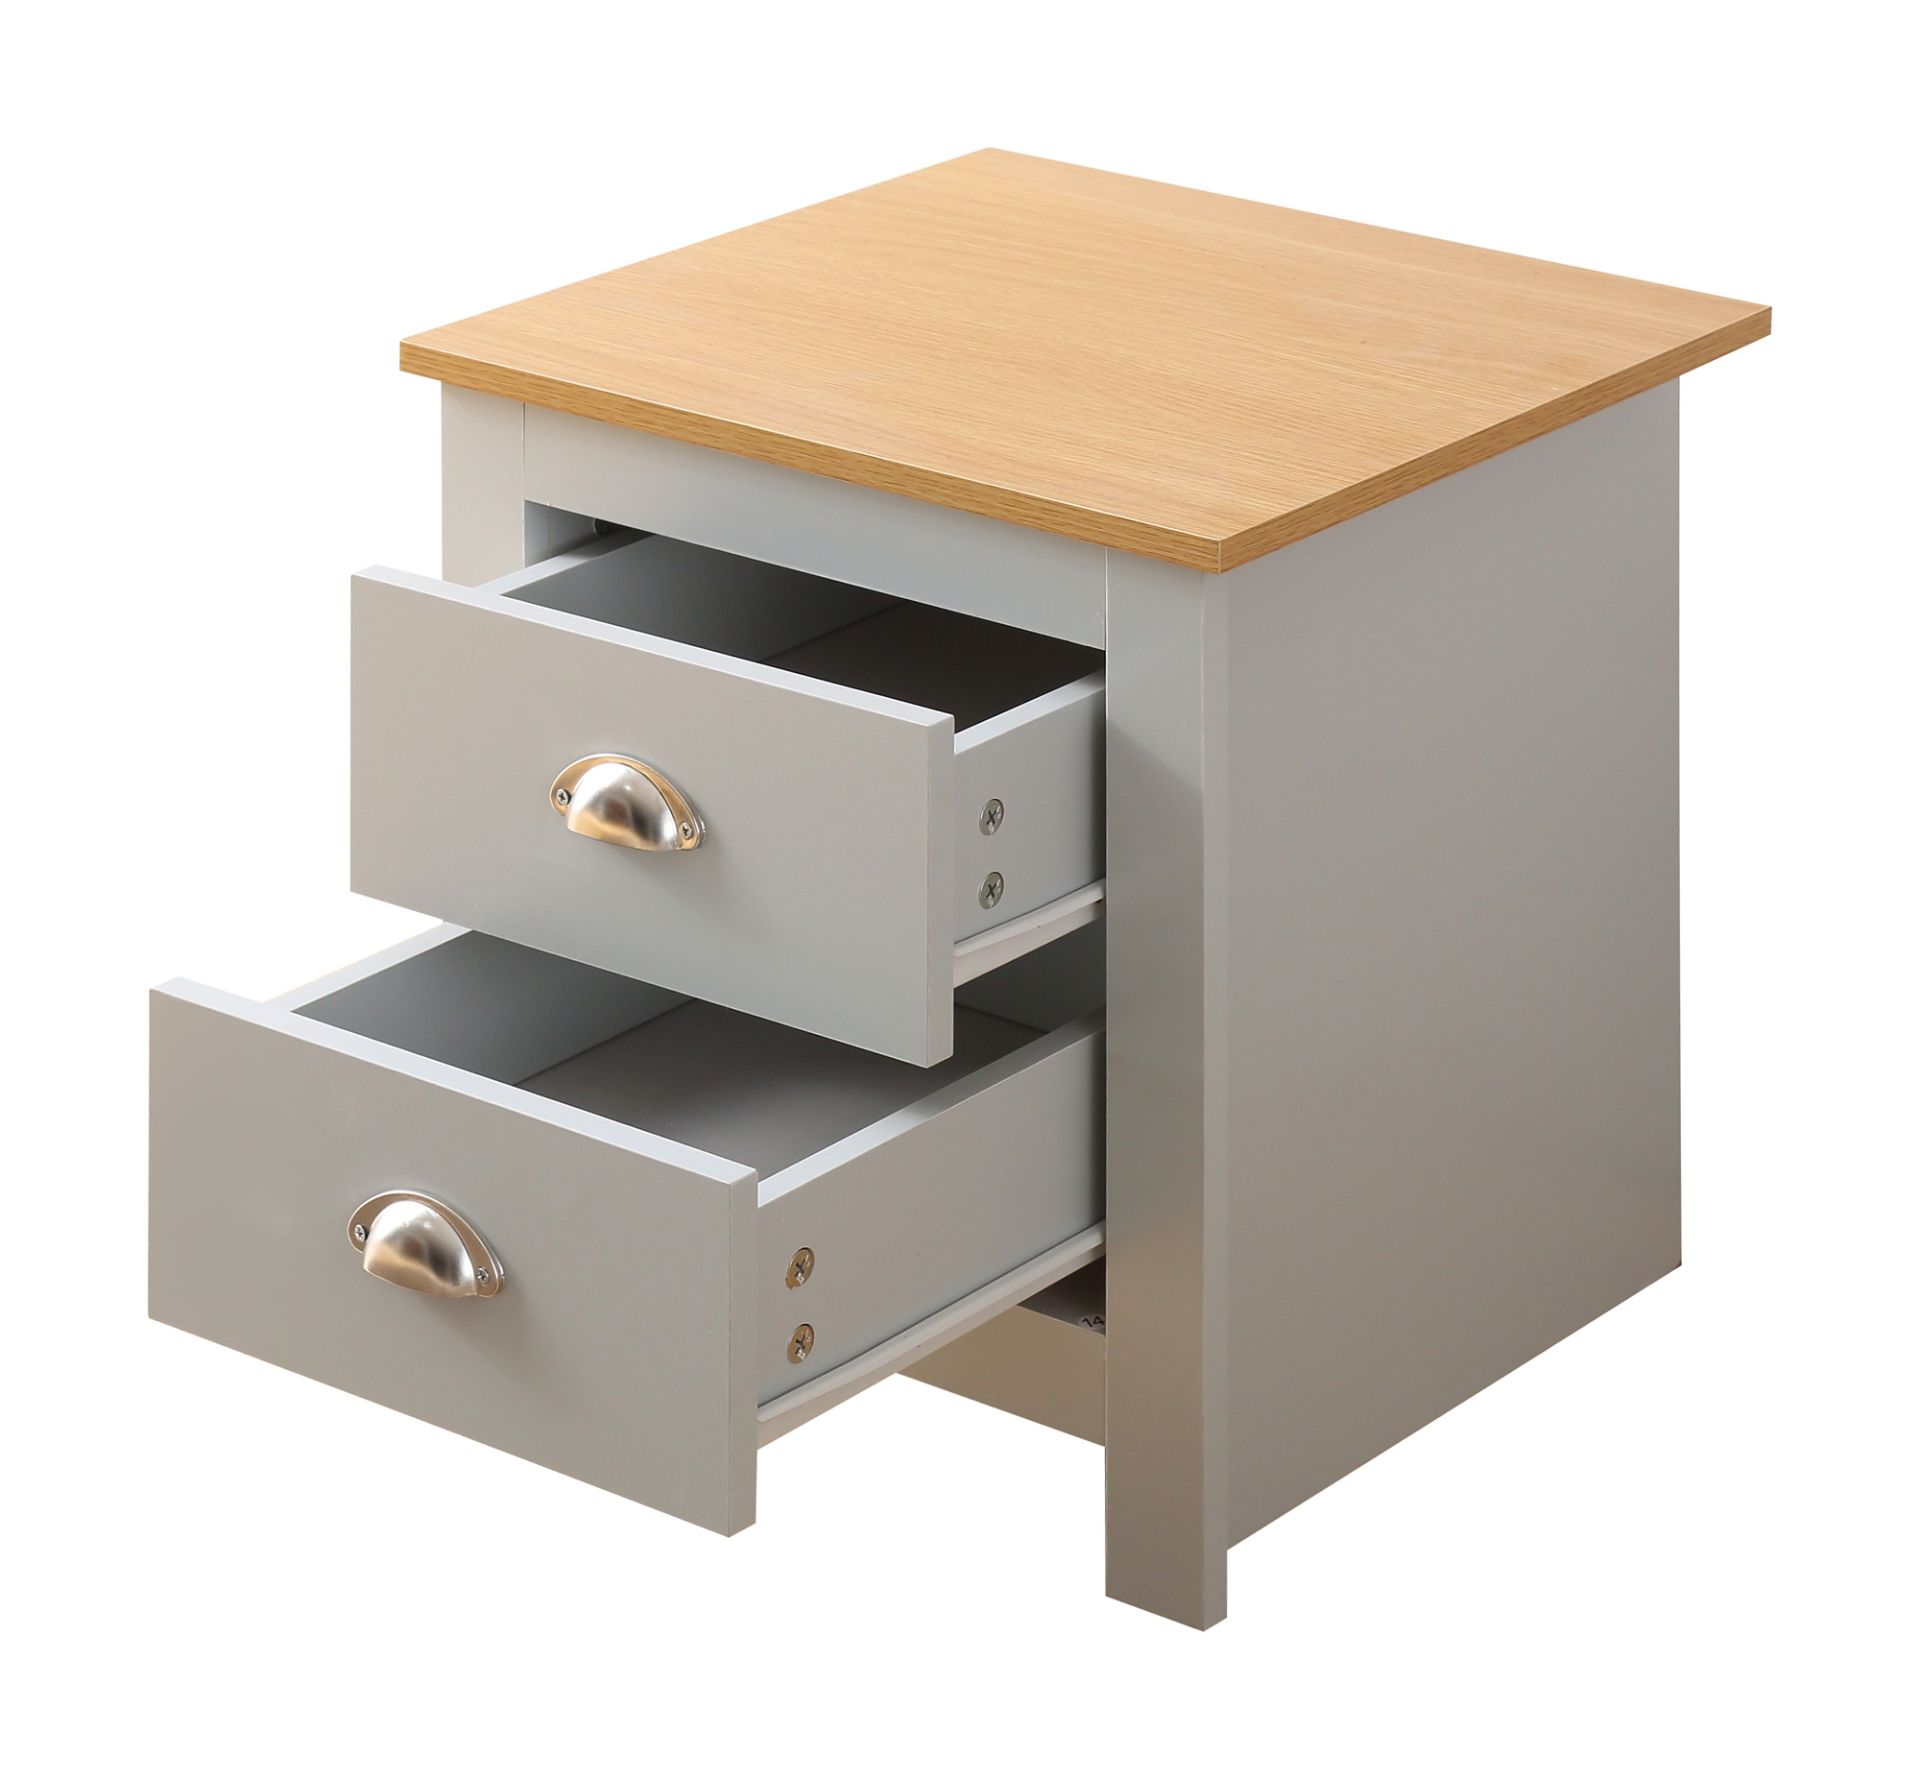 2 X BRAND NEW FLAT PACKED GREY WITH OAK TOP SHAKER-INSPIRED STYLISH DESIGN BEDSIDES - Image 4 of 4